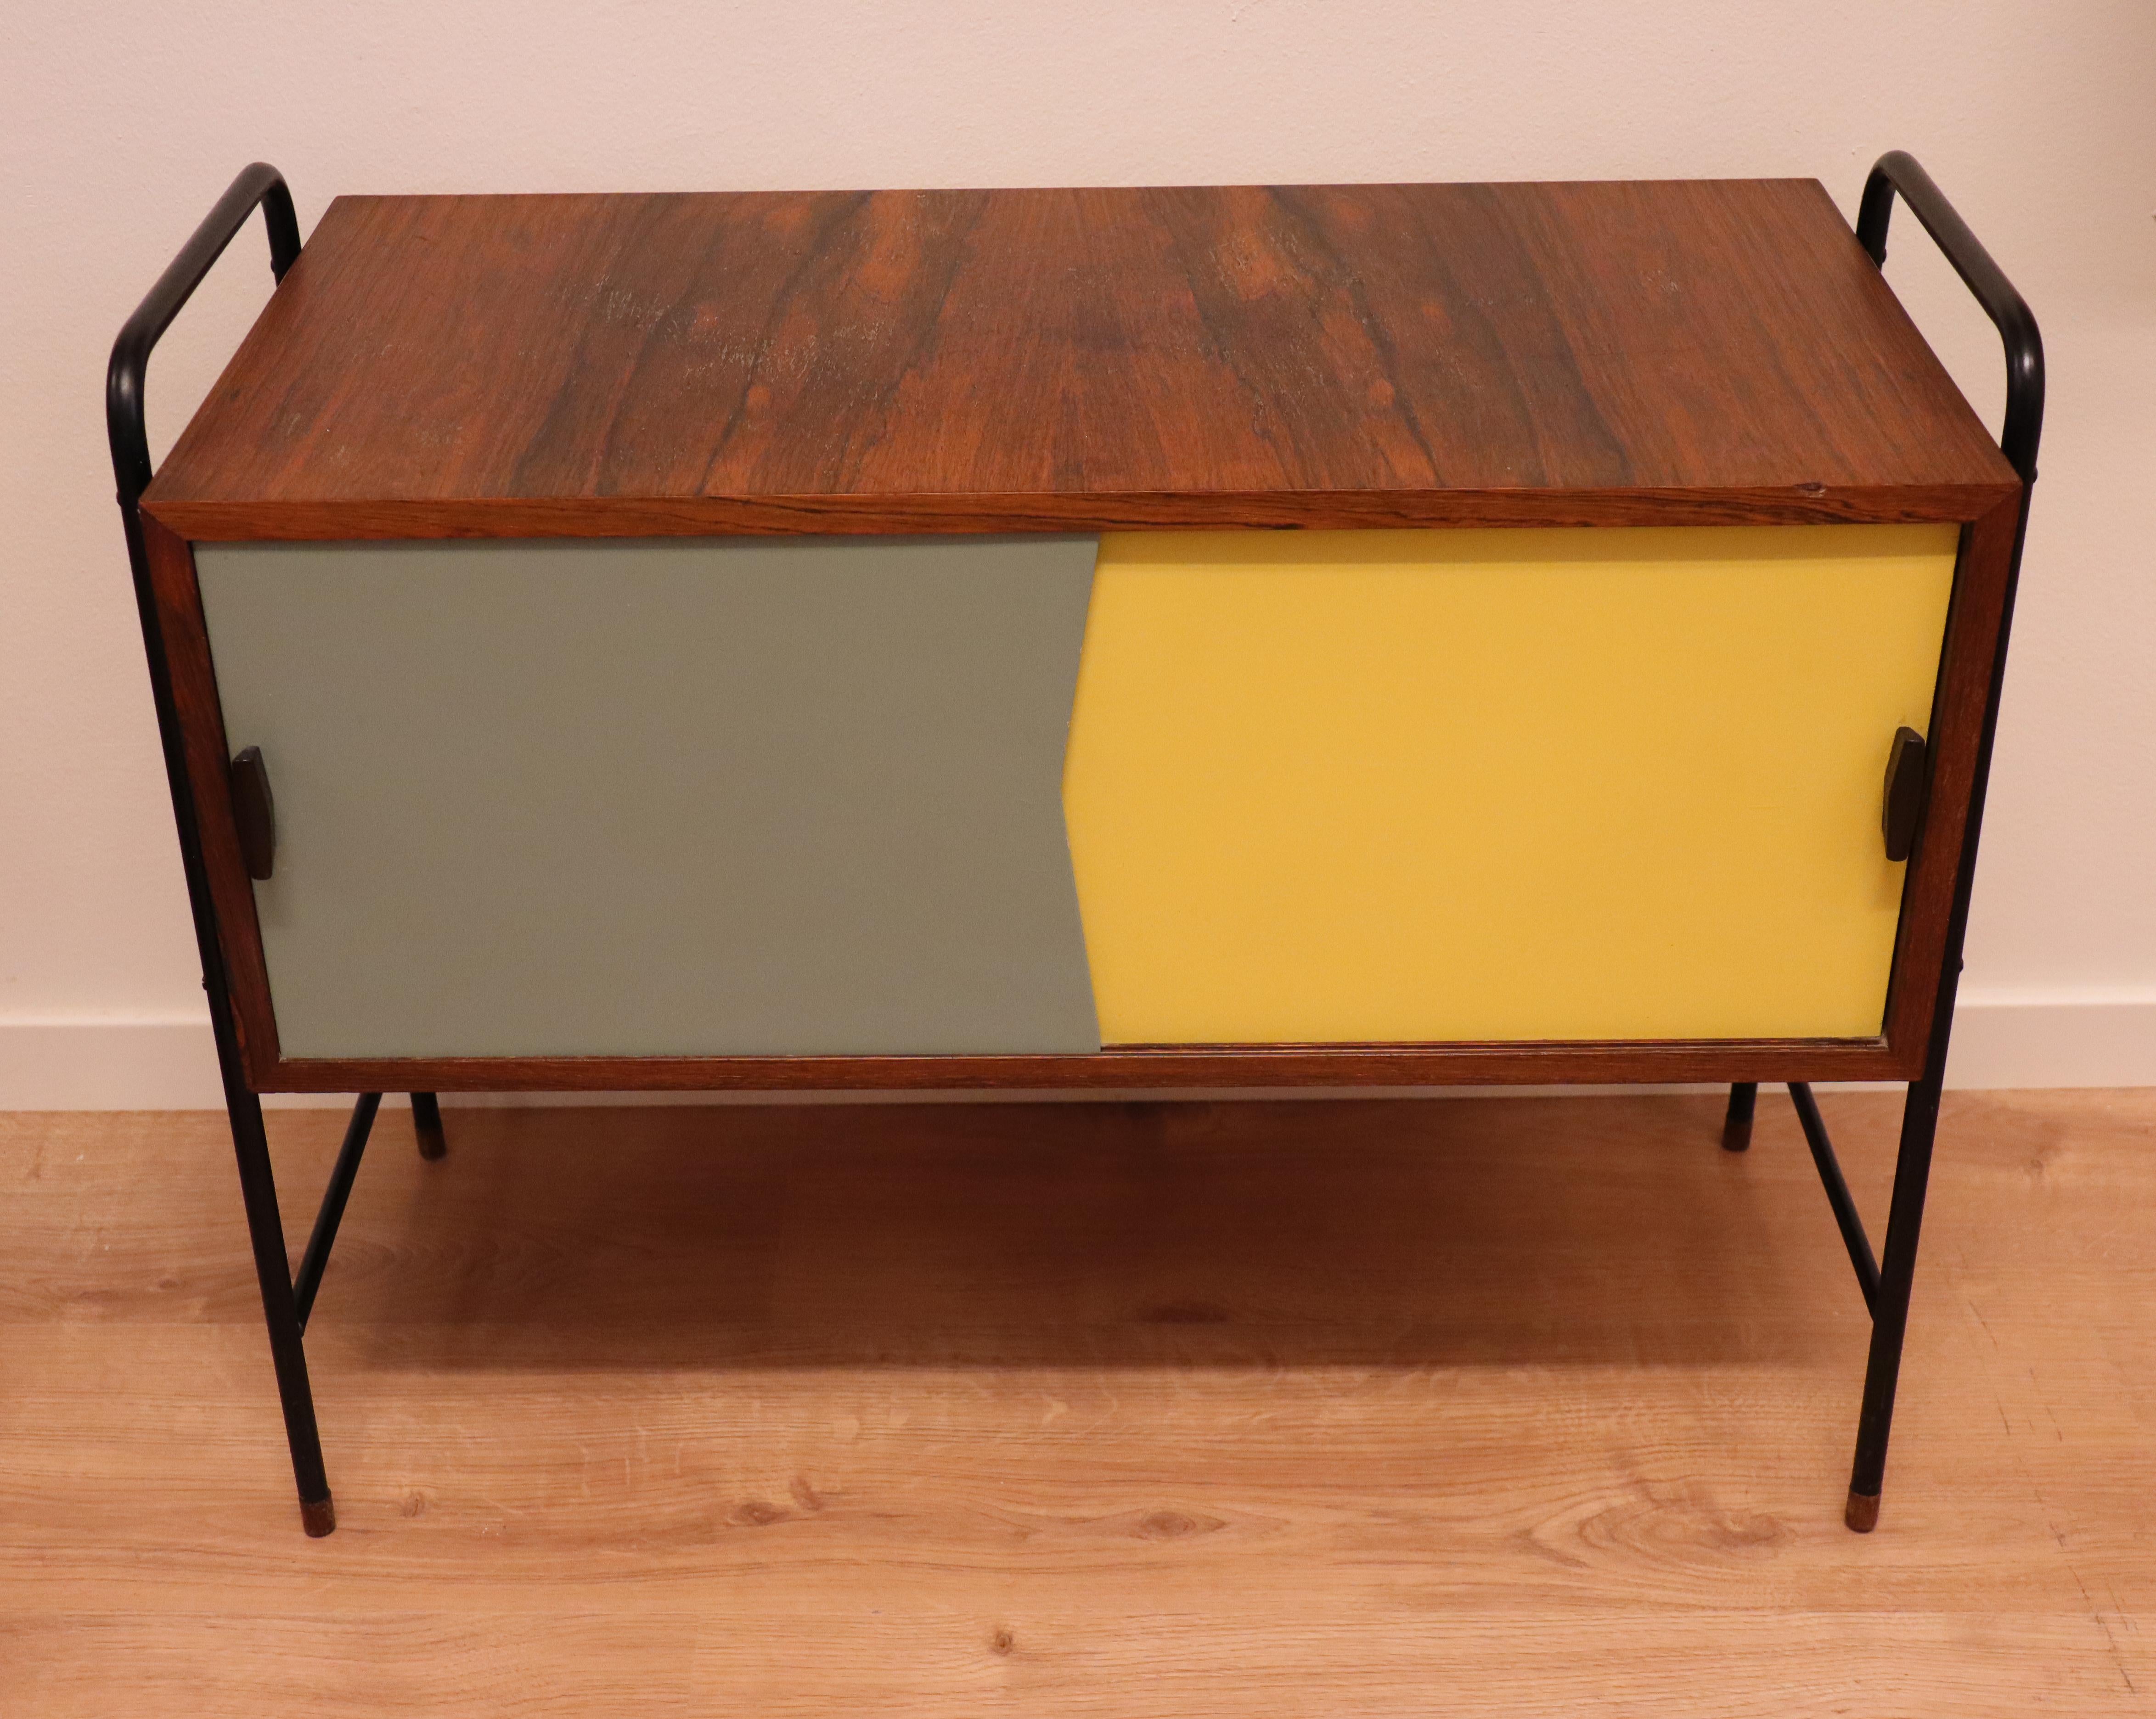 Teak Small Sideboard, Yellow/Gray - Sliding Doors - Probably Denmark 1950s For Sale